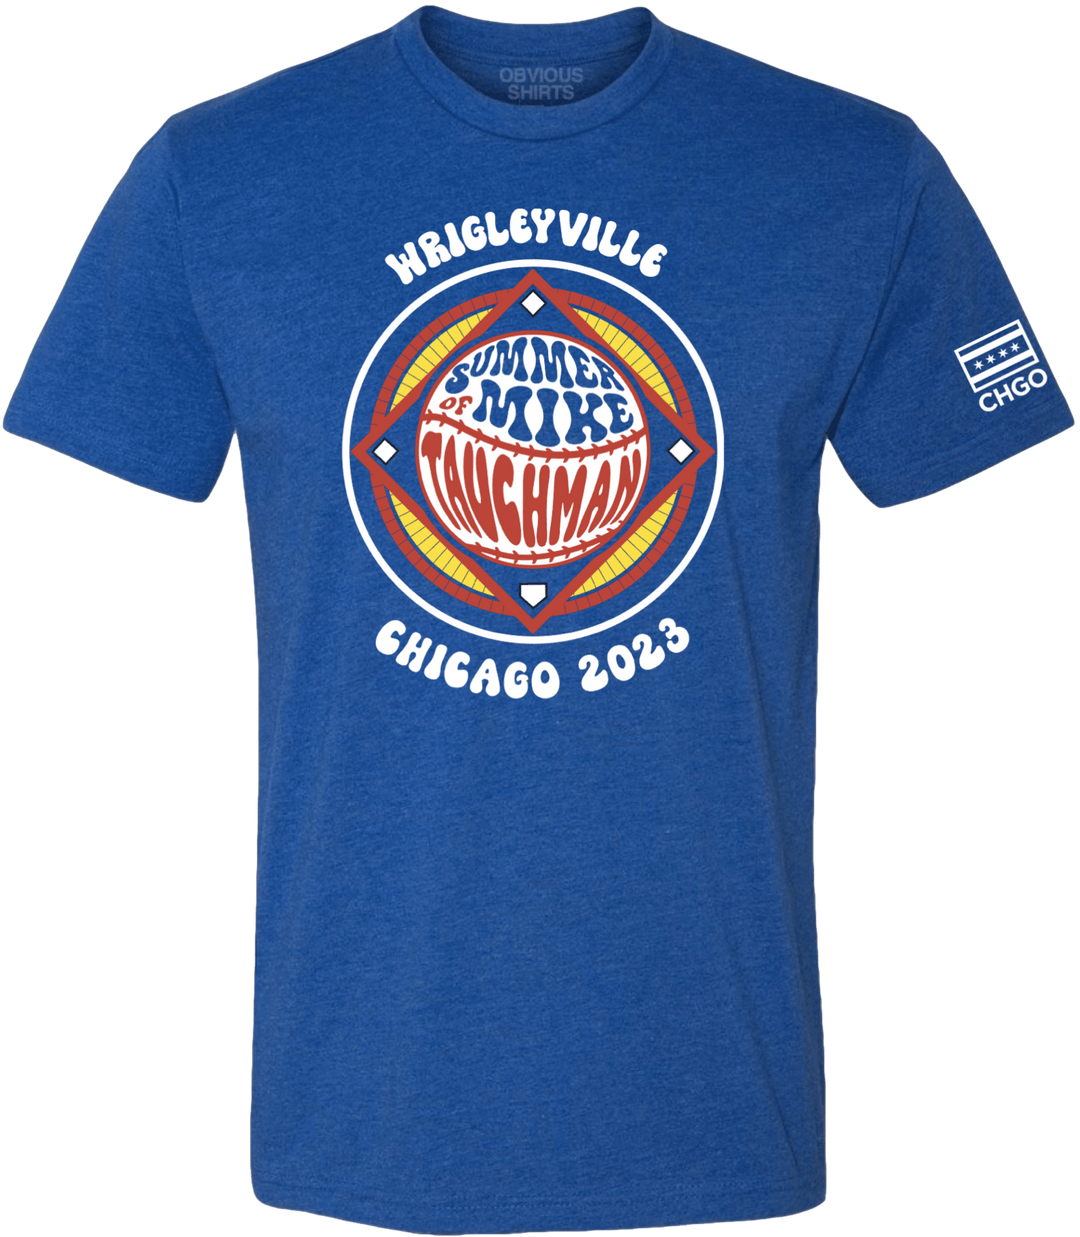 SUMMER OF MIKE TAUCHMAN. - OBVIOUS SHIRTS